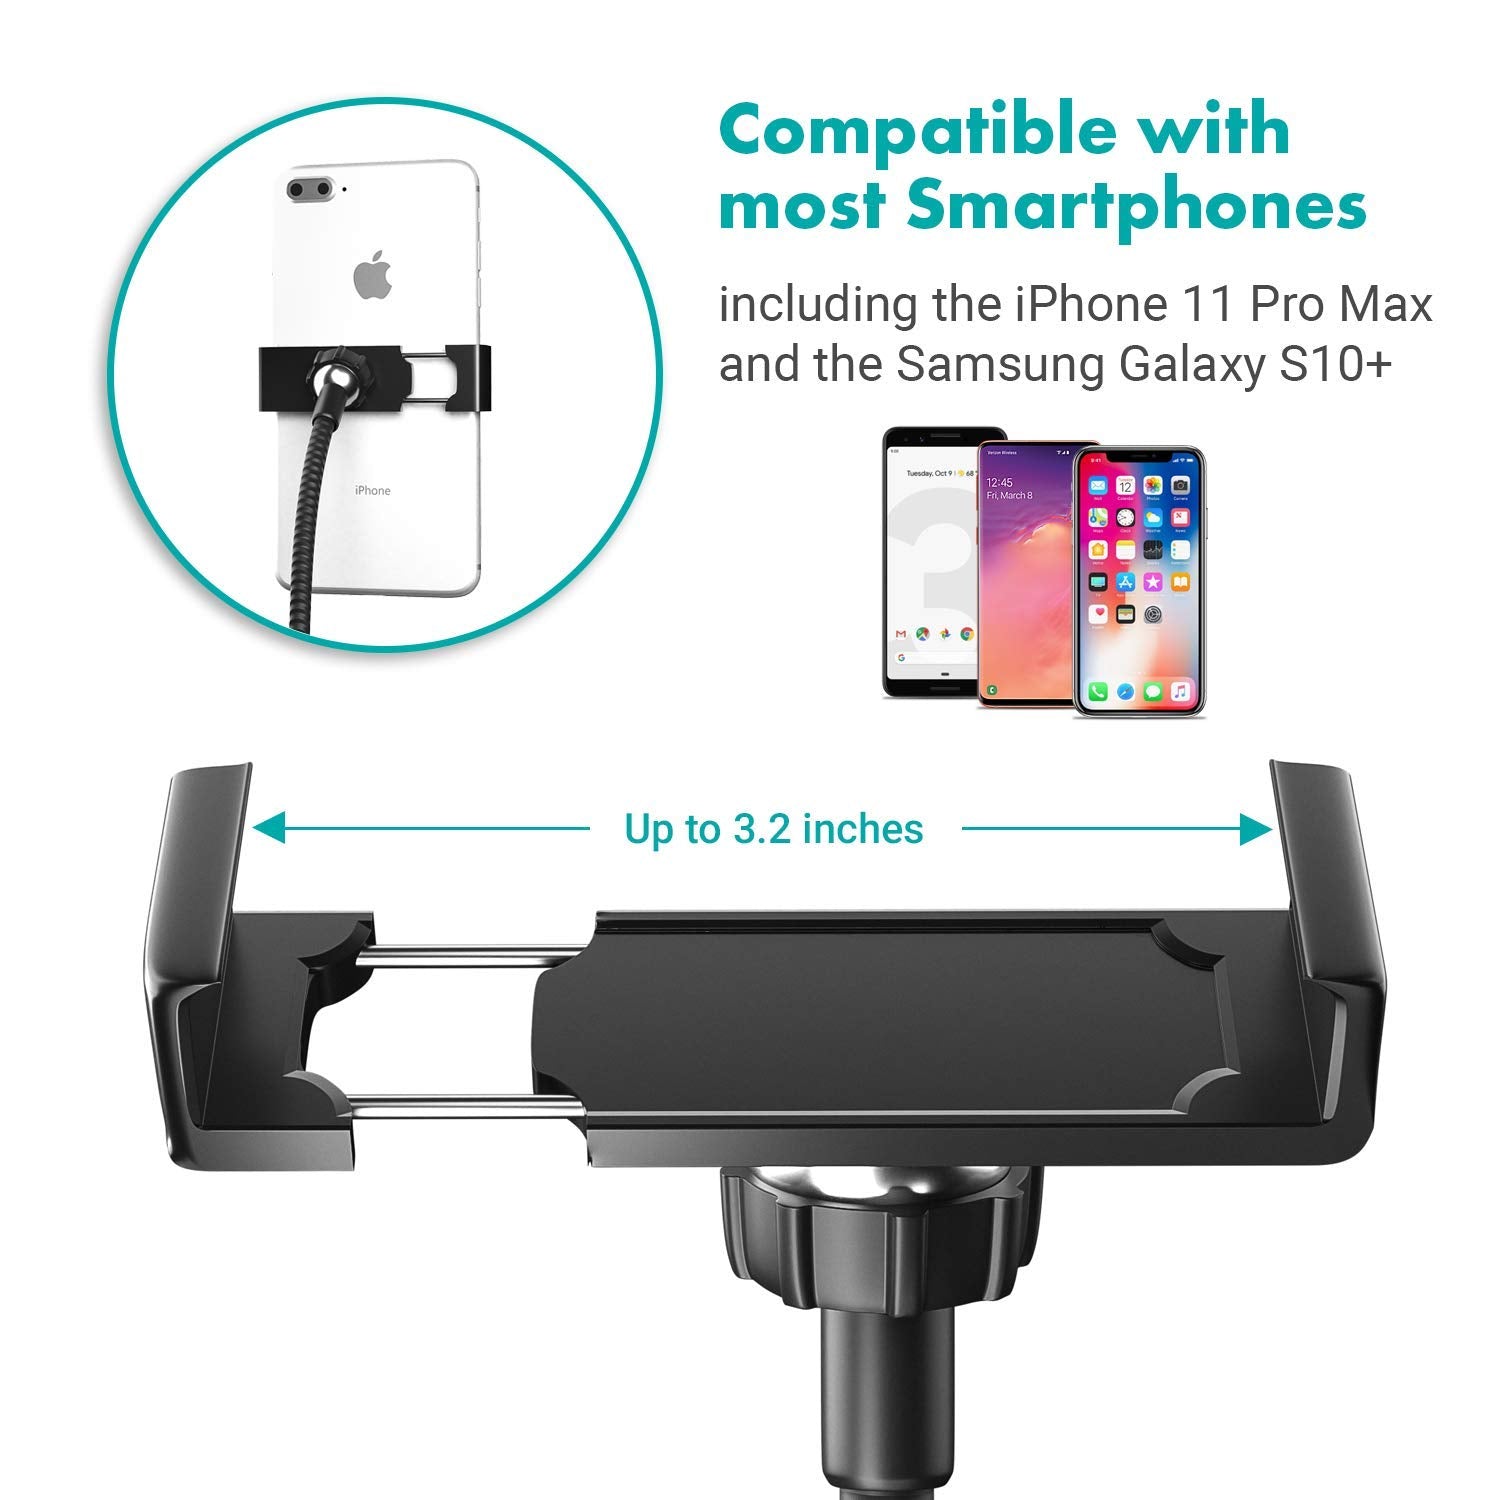 Movo VGC-3 Selfie Ring Light Stand with Cell Phone Holder and Third Flexible Arm with a 1/4" Mount for Microphones - for TIK Tok, YouTube, Live Stream, Tutorial, Vlog - Compatible with iPhone/Android  - Like New